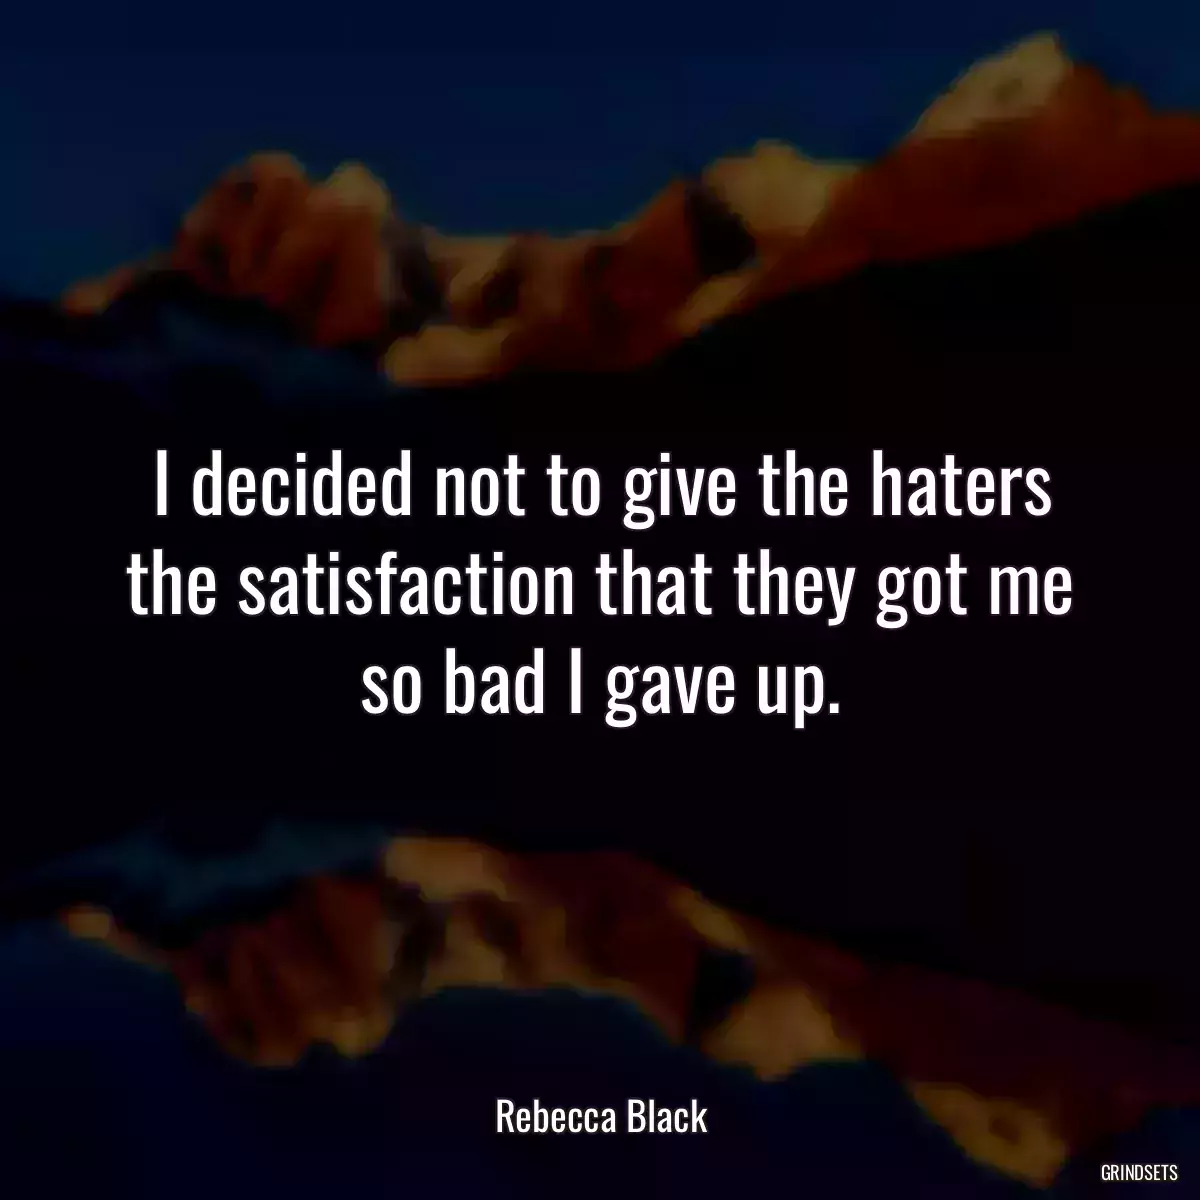 I decided not to give the haters the satisfaction that they got me so bad I gave up.